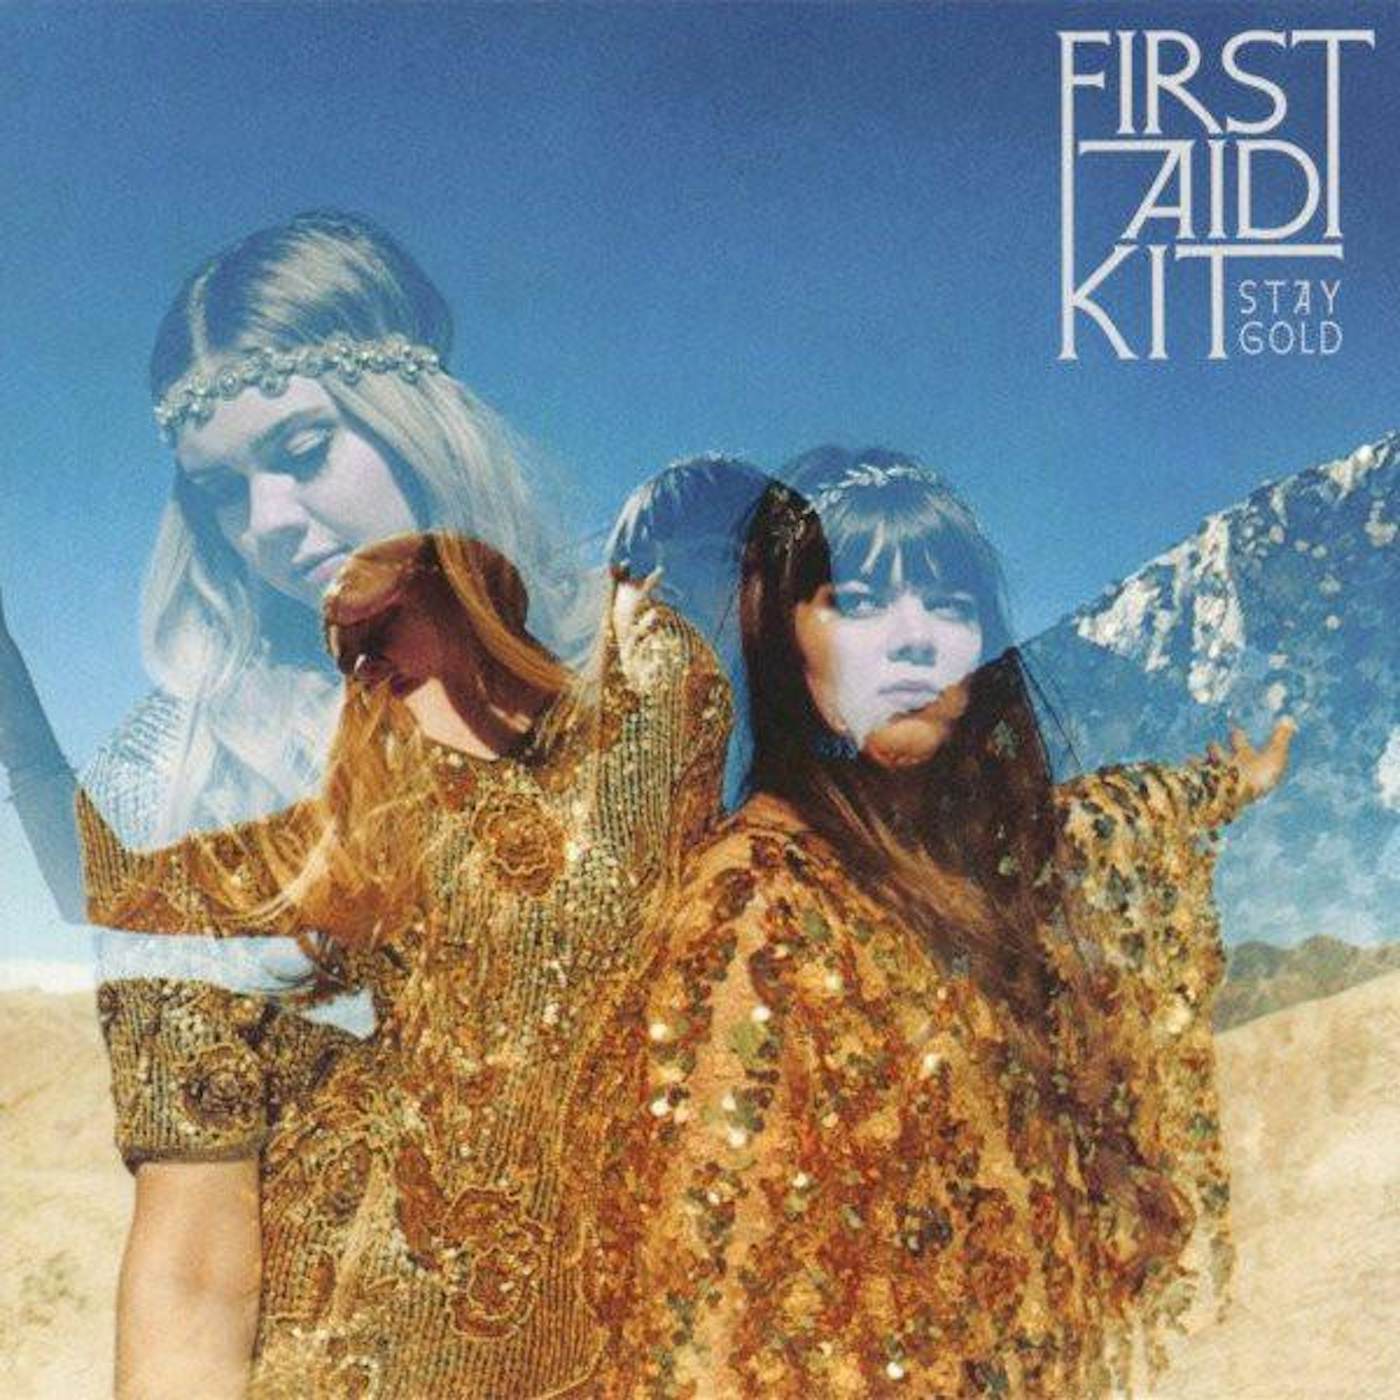 First Aid Kit STAY GOLD CD